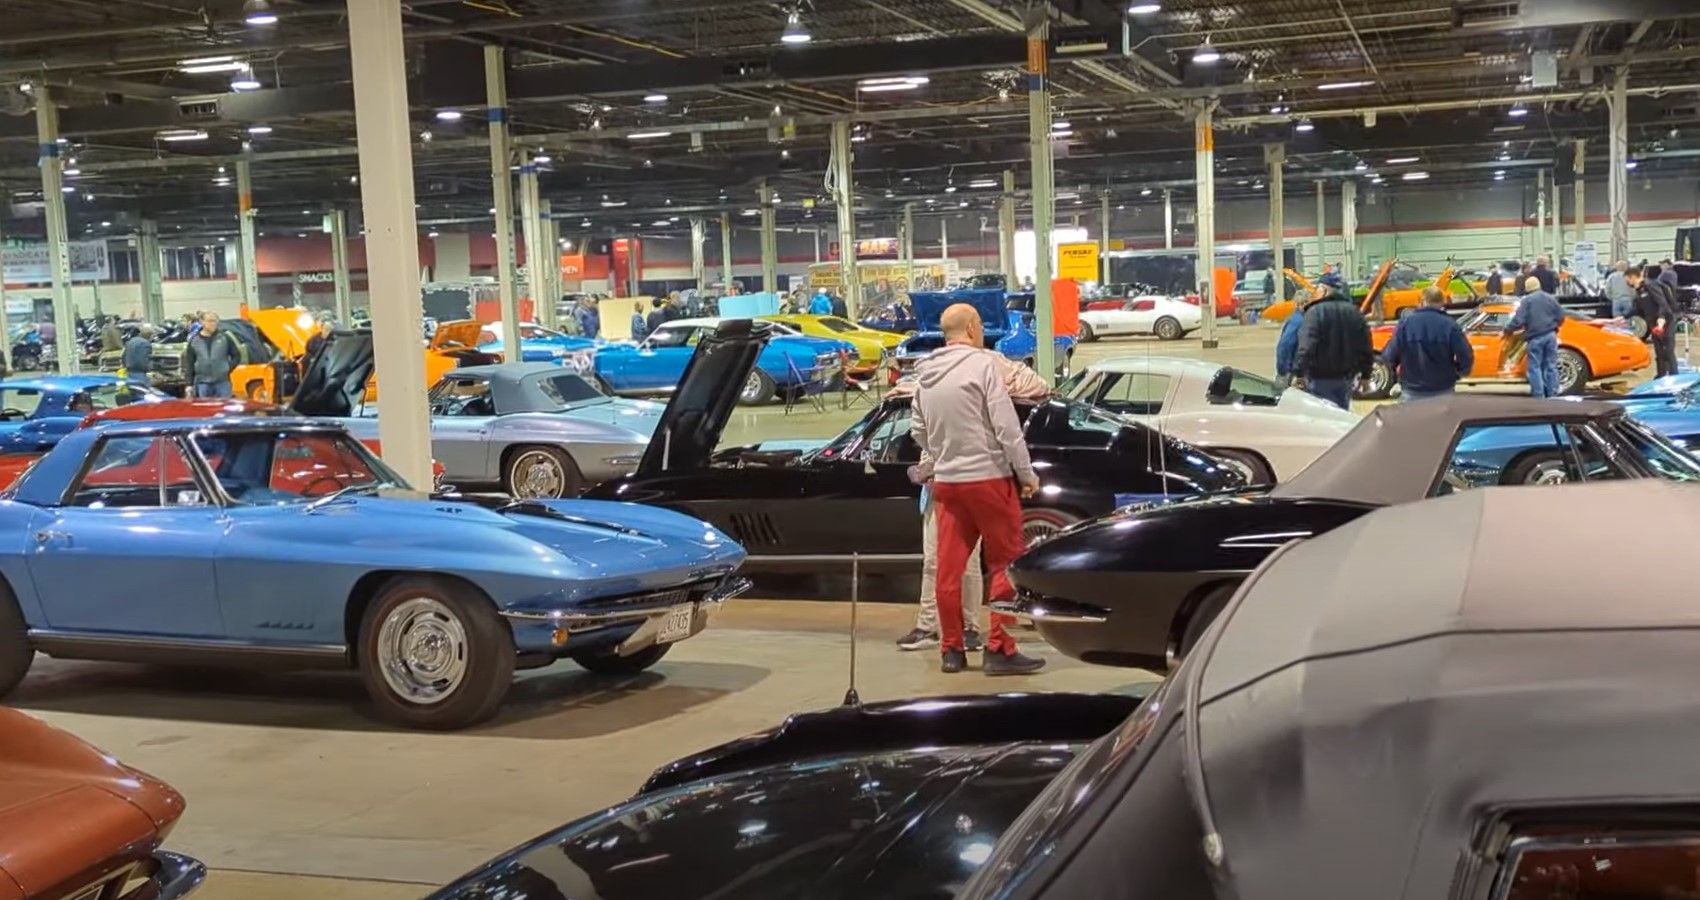 Multiple cars in hangar, muscle cars and Corvette Nationals show